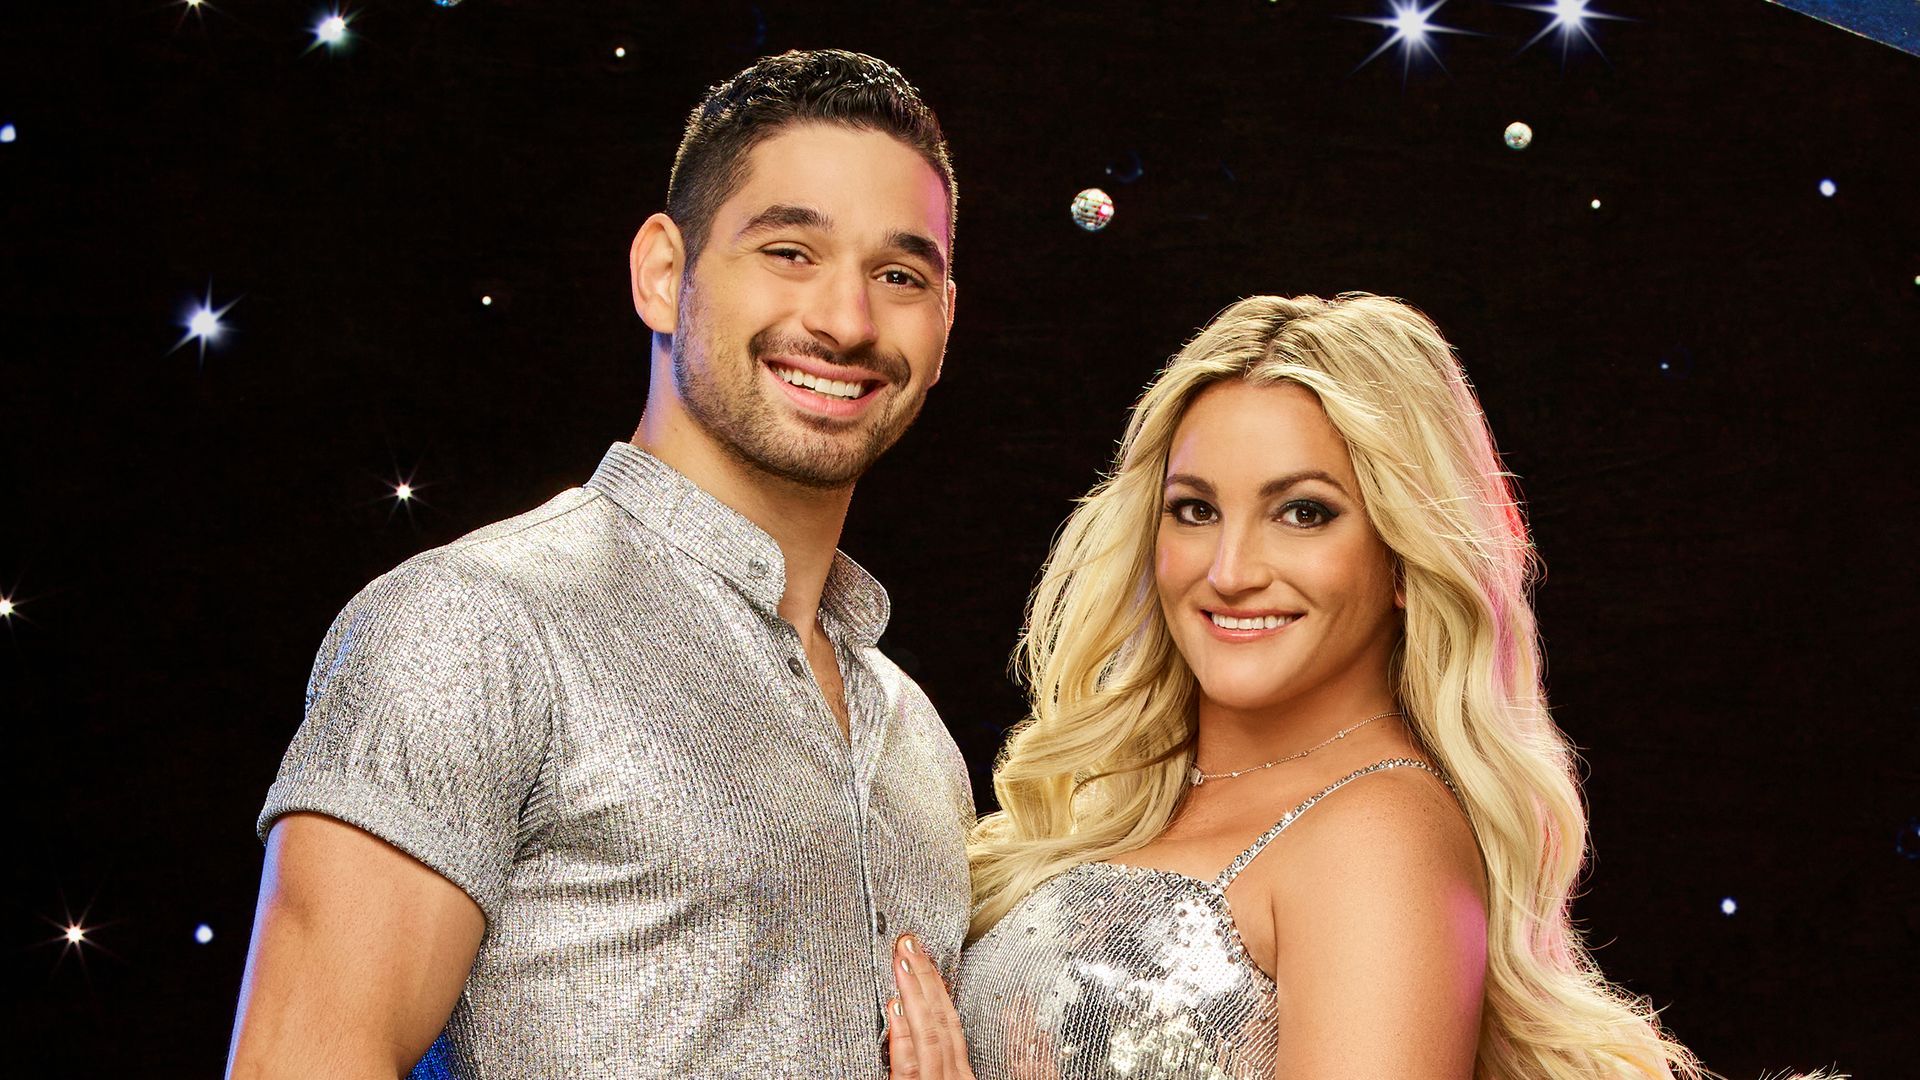 DANCING WITH THE STARS - ABC's "Dancing With The Stars" stars Alan Bersten and Jamie Lynn Spears.